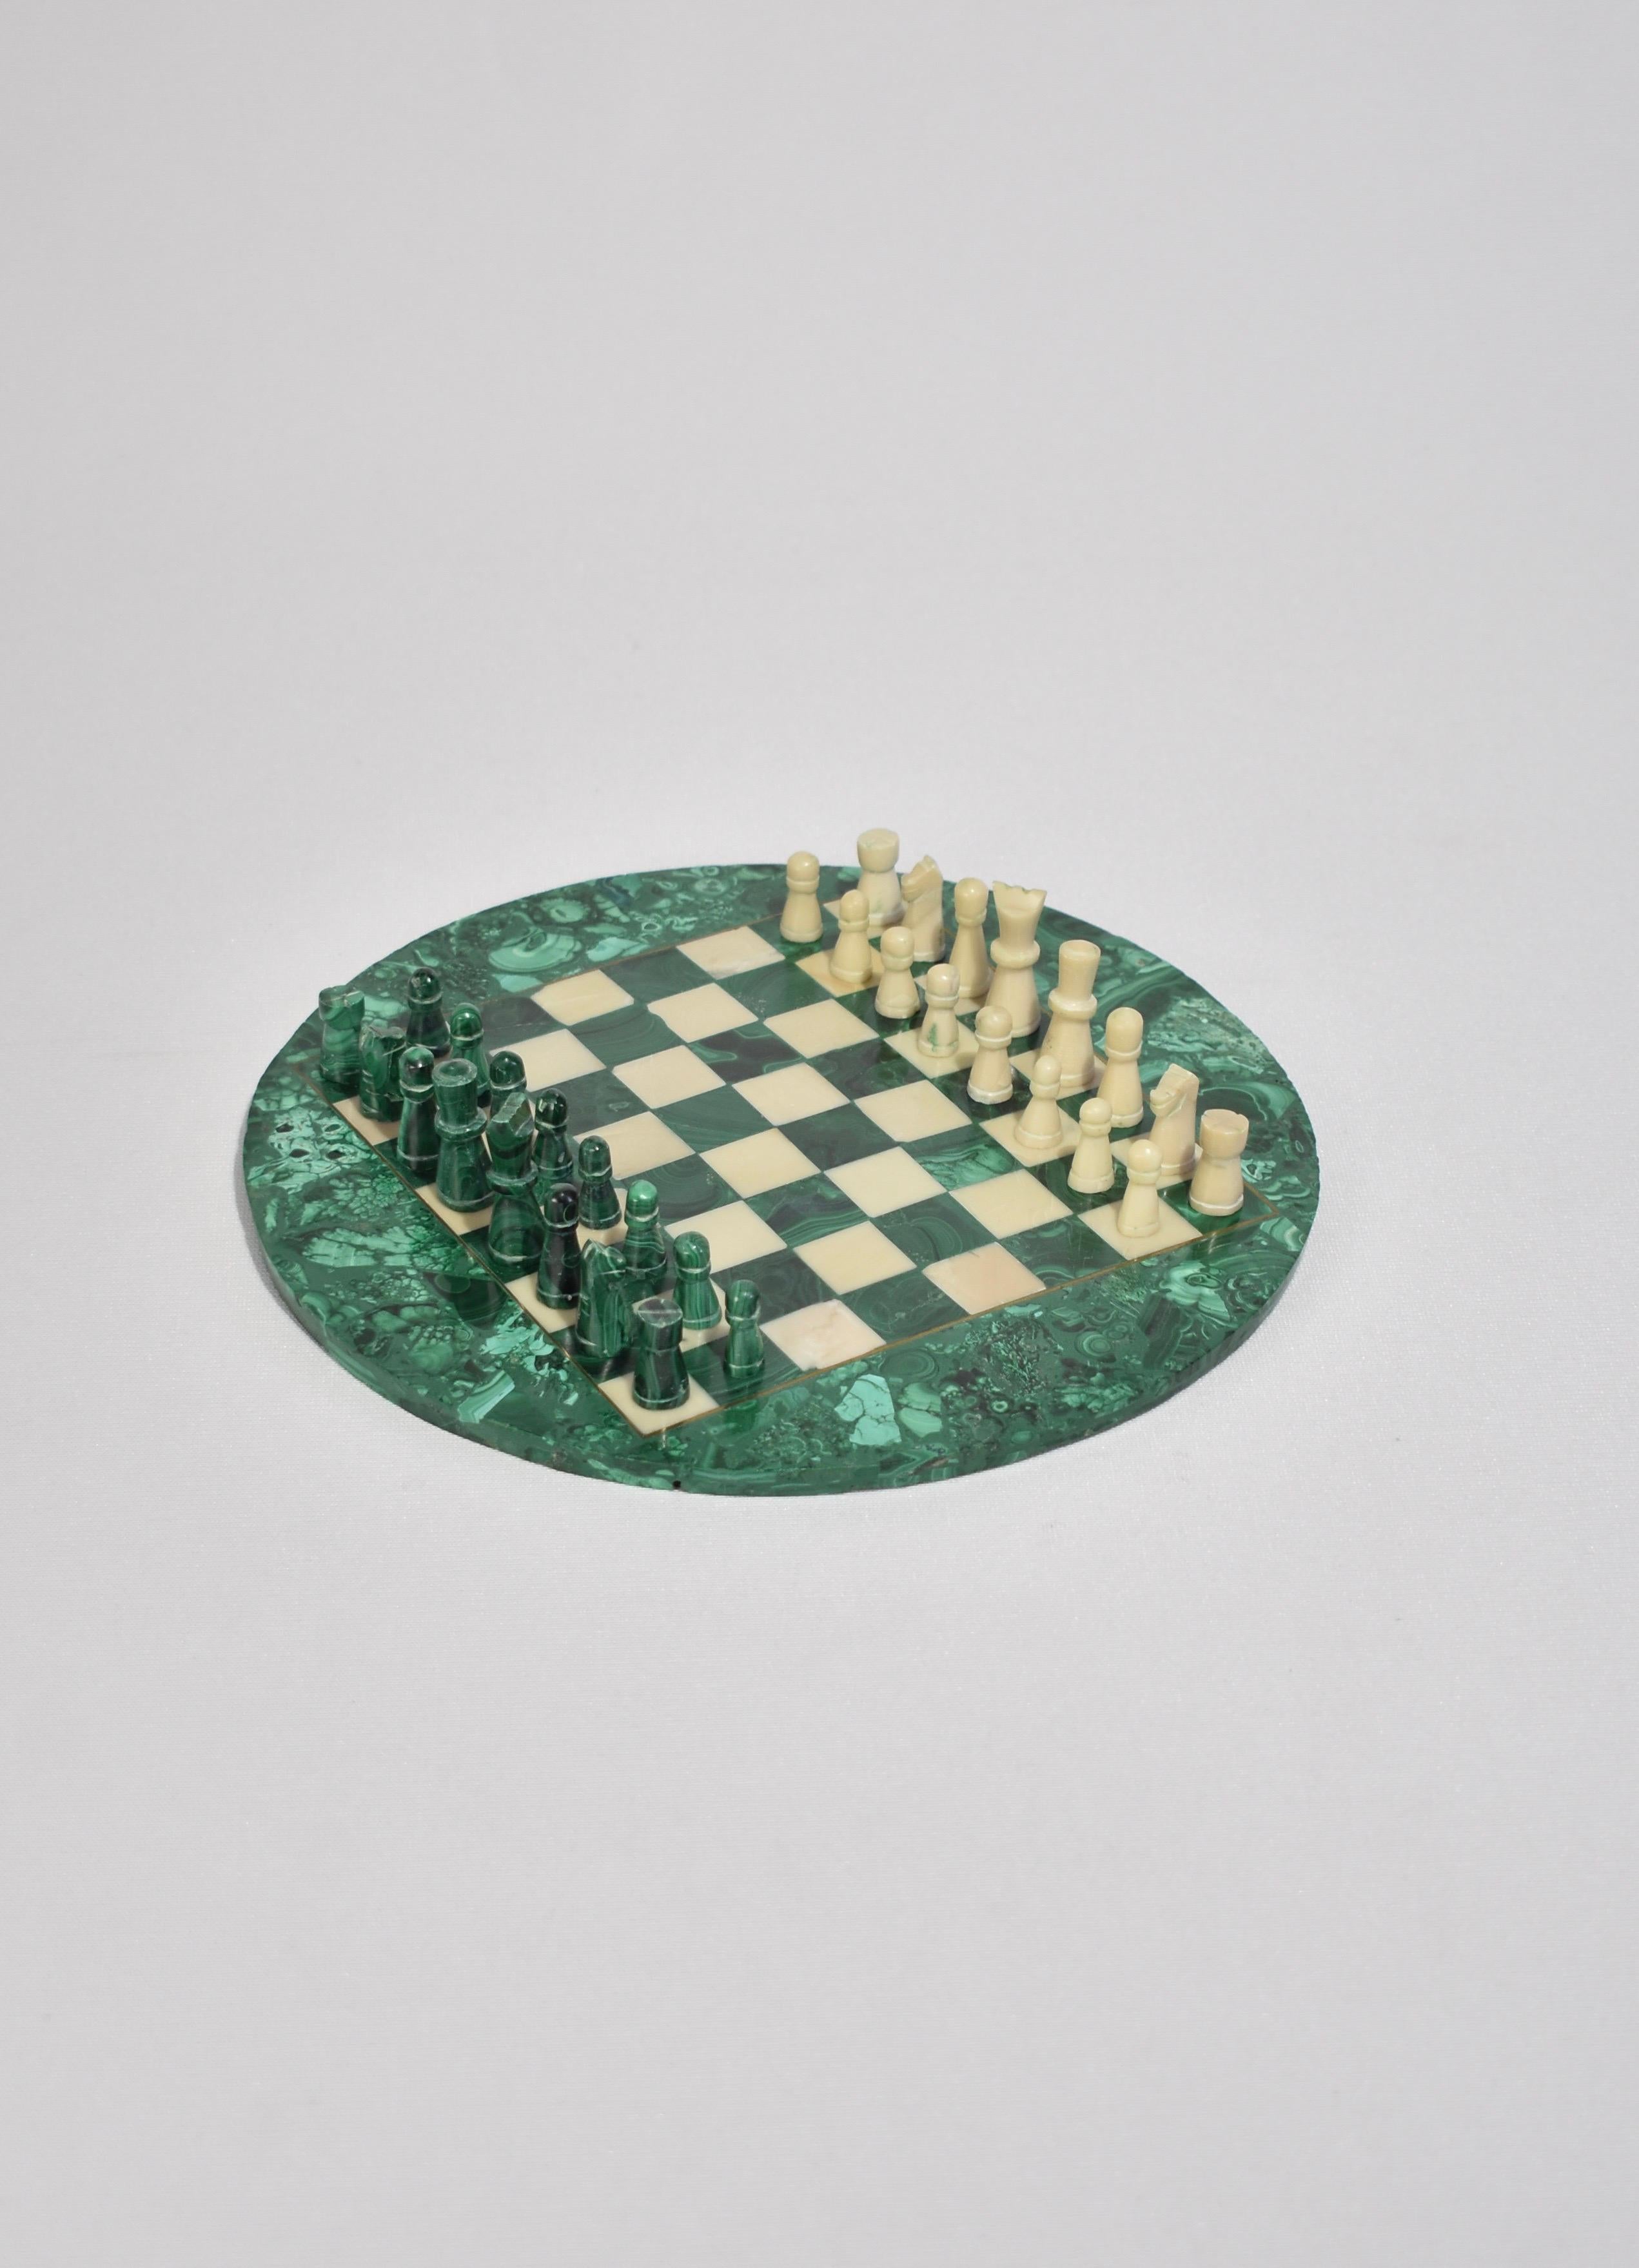 Rare, small round malachite chess board with hand carved pieces in malachite and off-white stone, accented in brass inlay. Includes all 32 pieces. 

Dimensions: 
Board measures 8.75